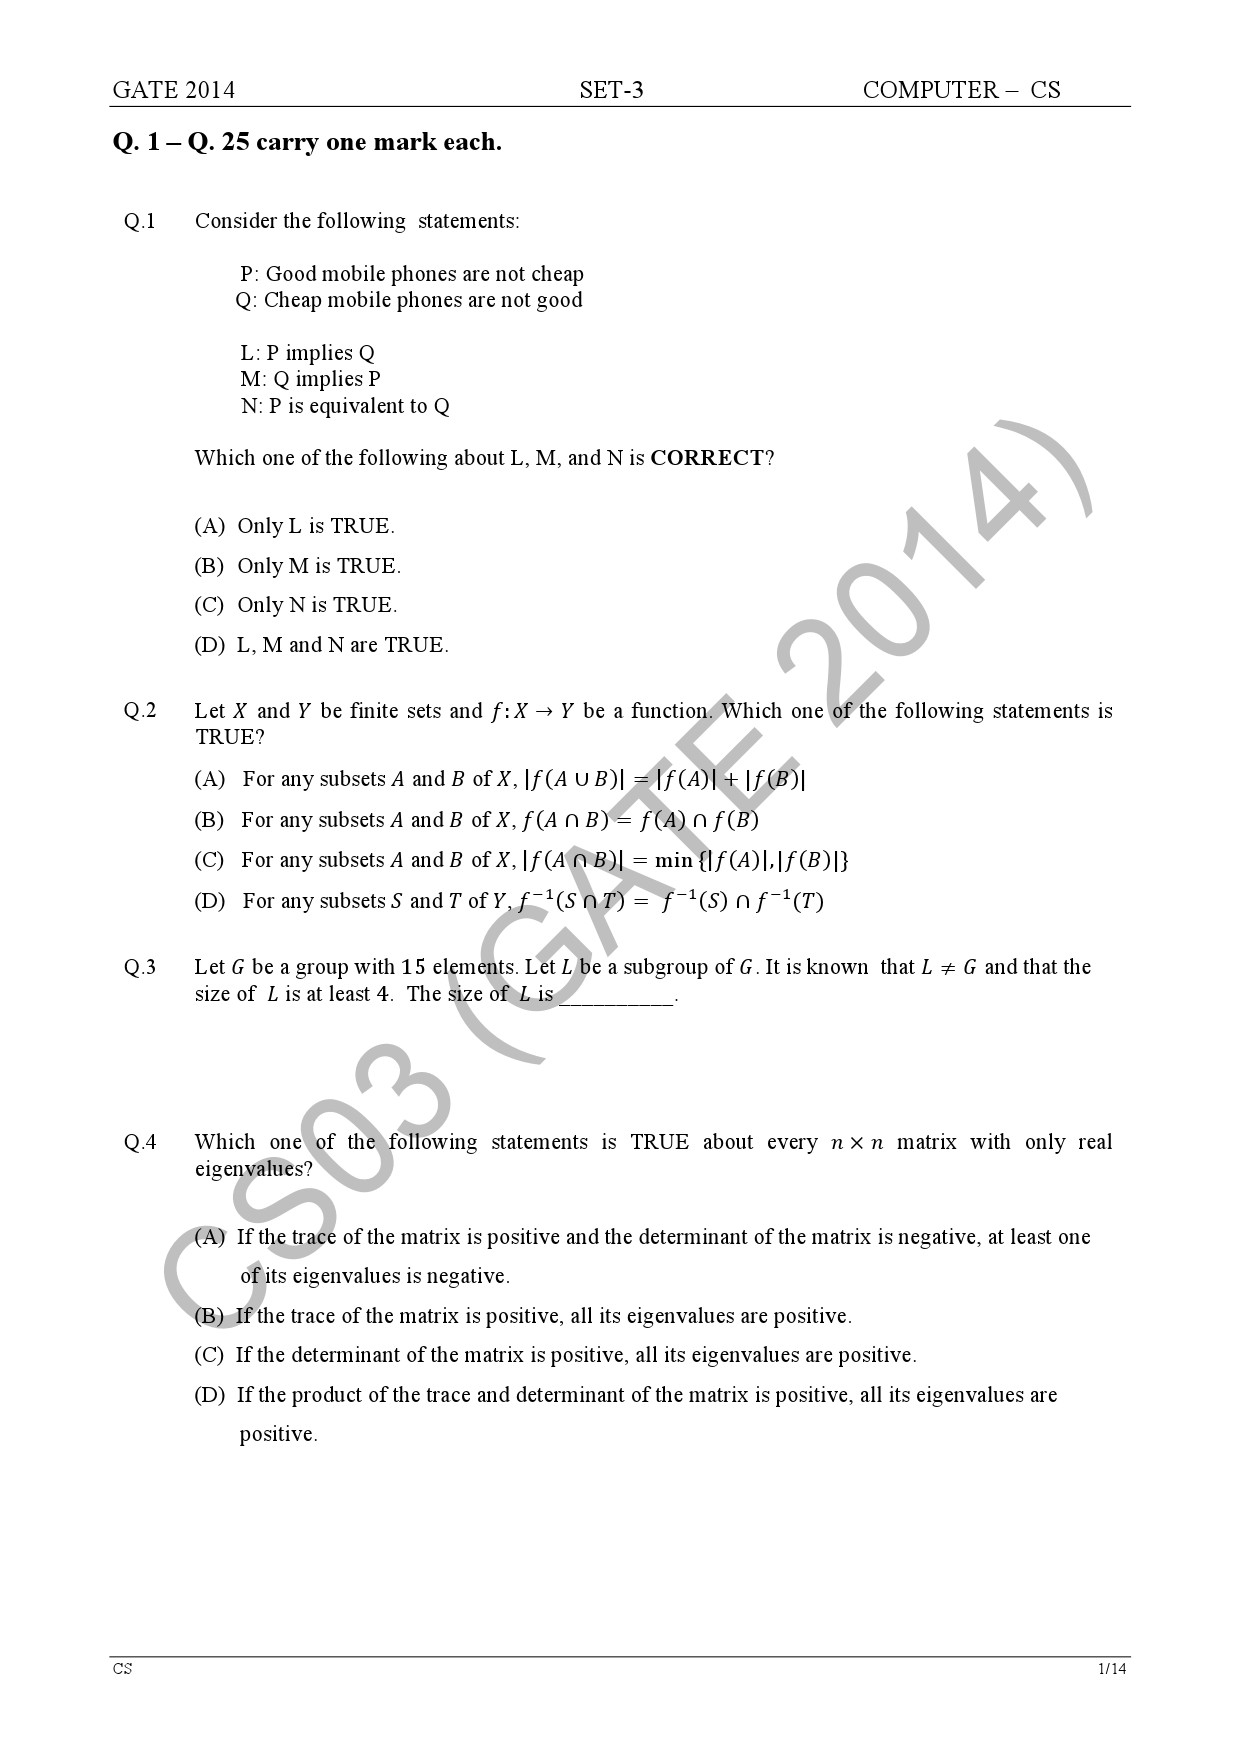 GATE Exam Question Paper 2014 Computer Science and Information Technology Set 3 7